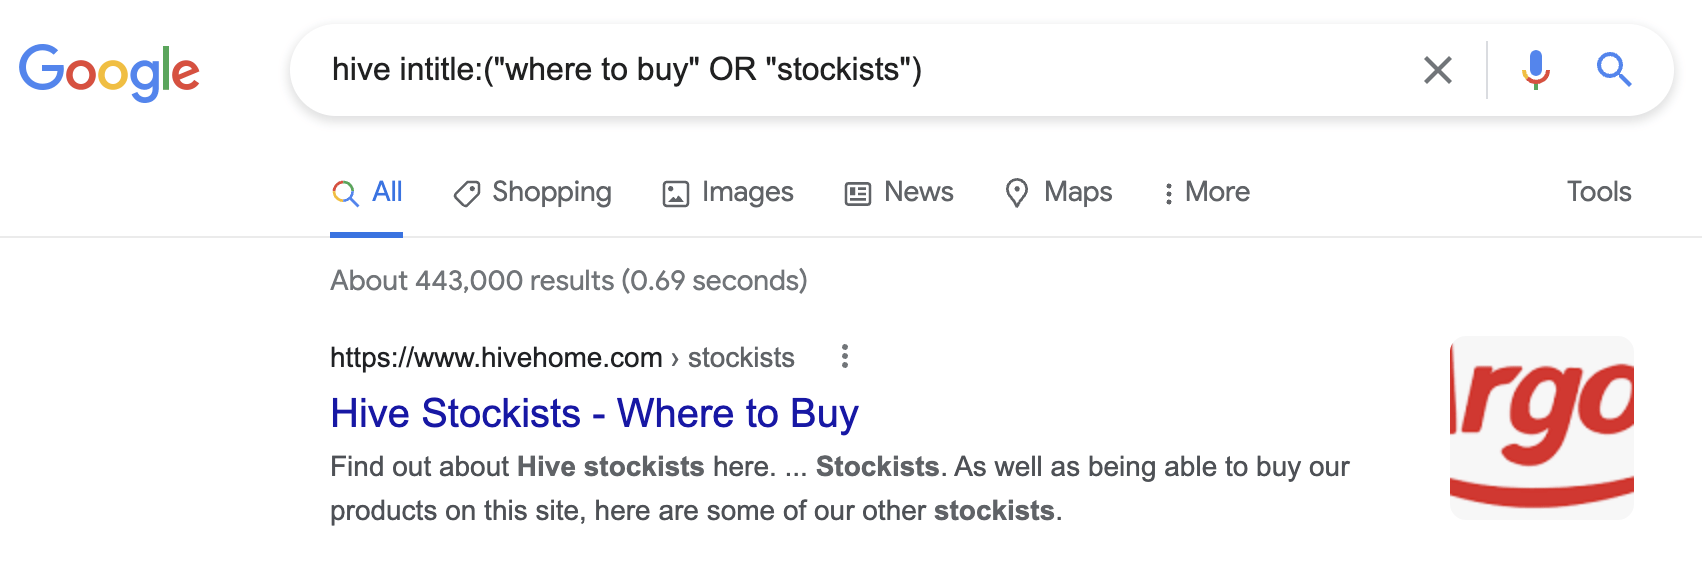 Searching for "where to buy" and "stockist" pages in Google
